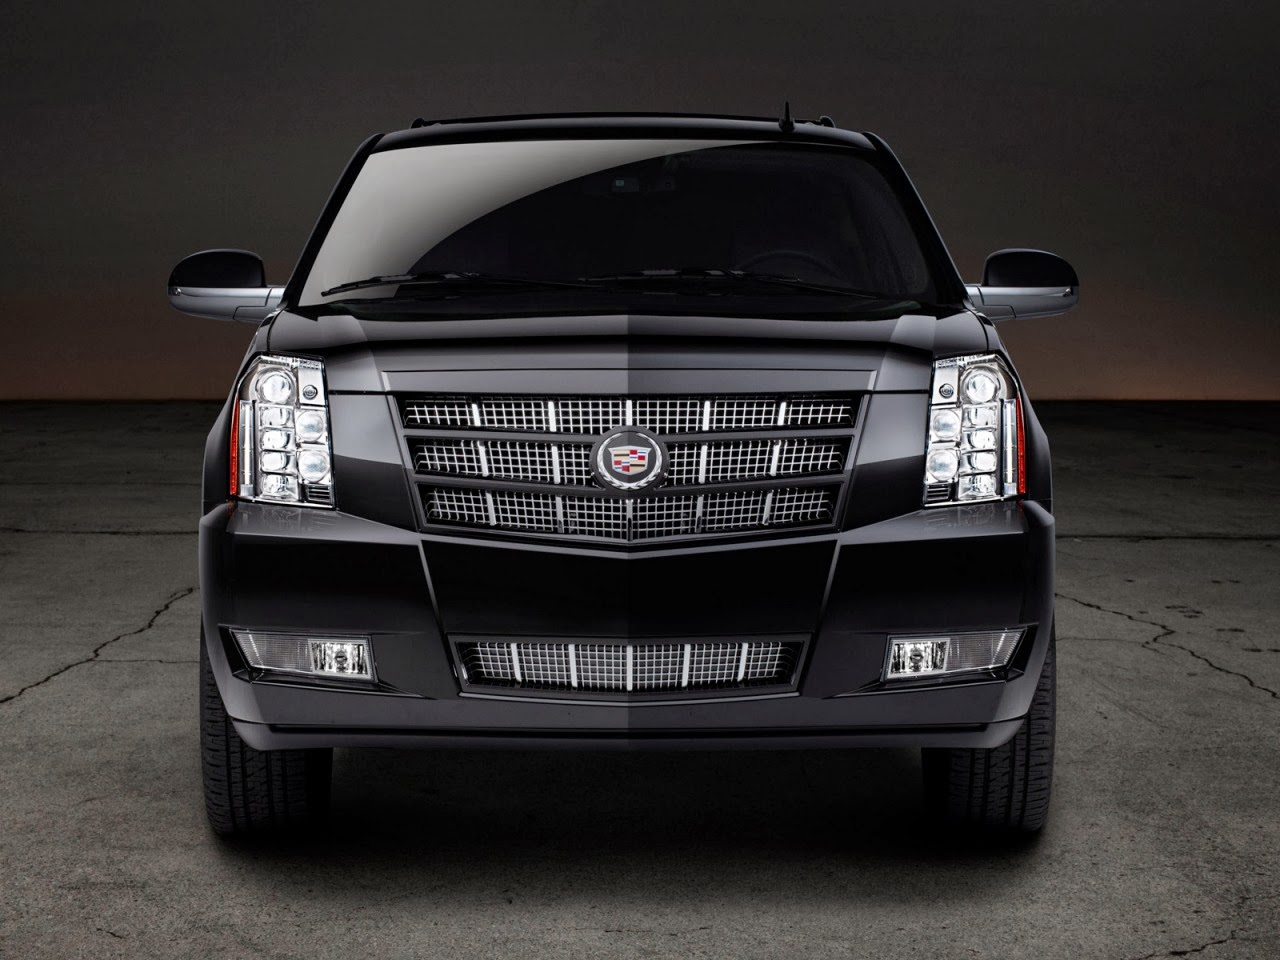 http://www.crazywallpapers.in/2014/02/cadillac-escalade-2012-premium-best.html